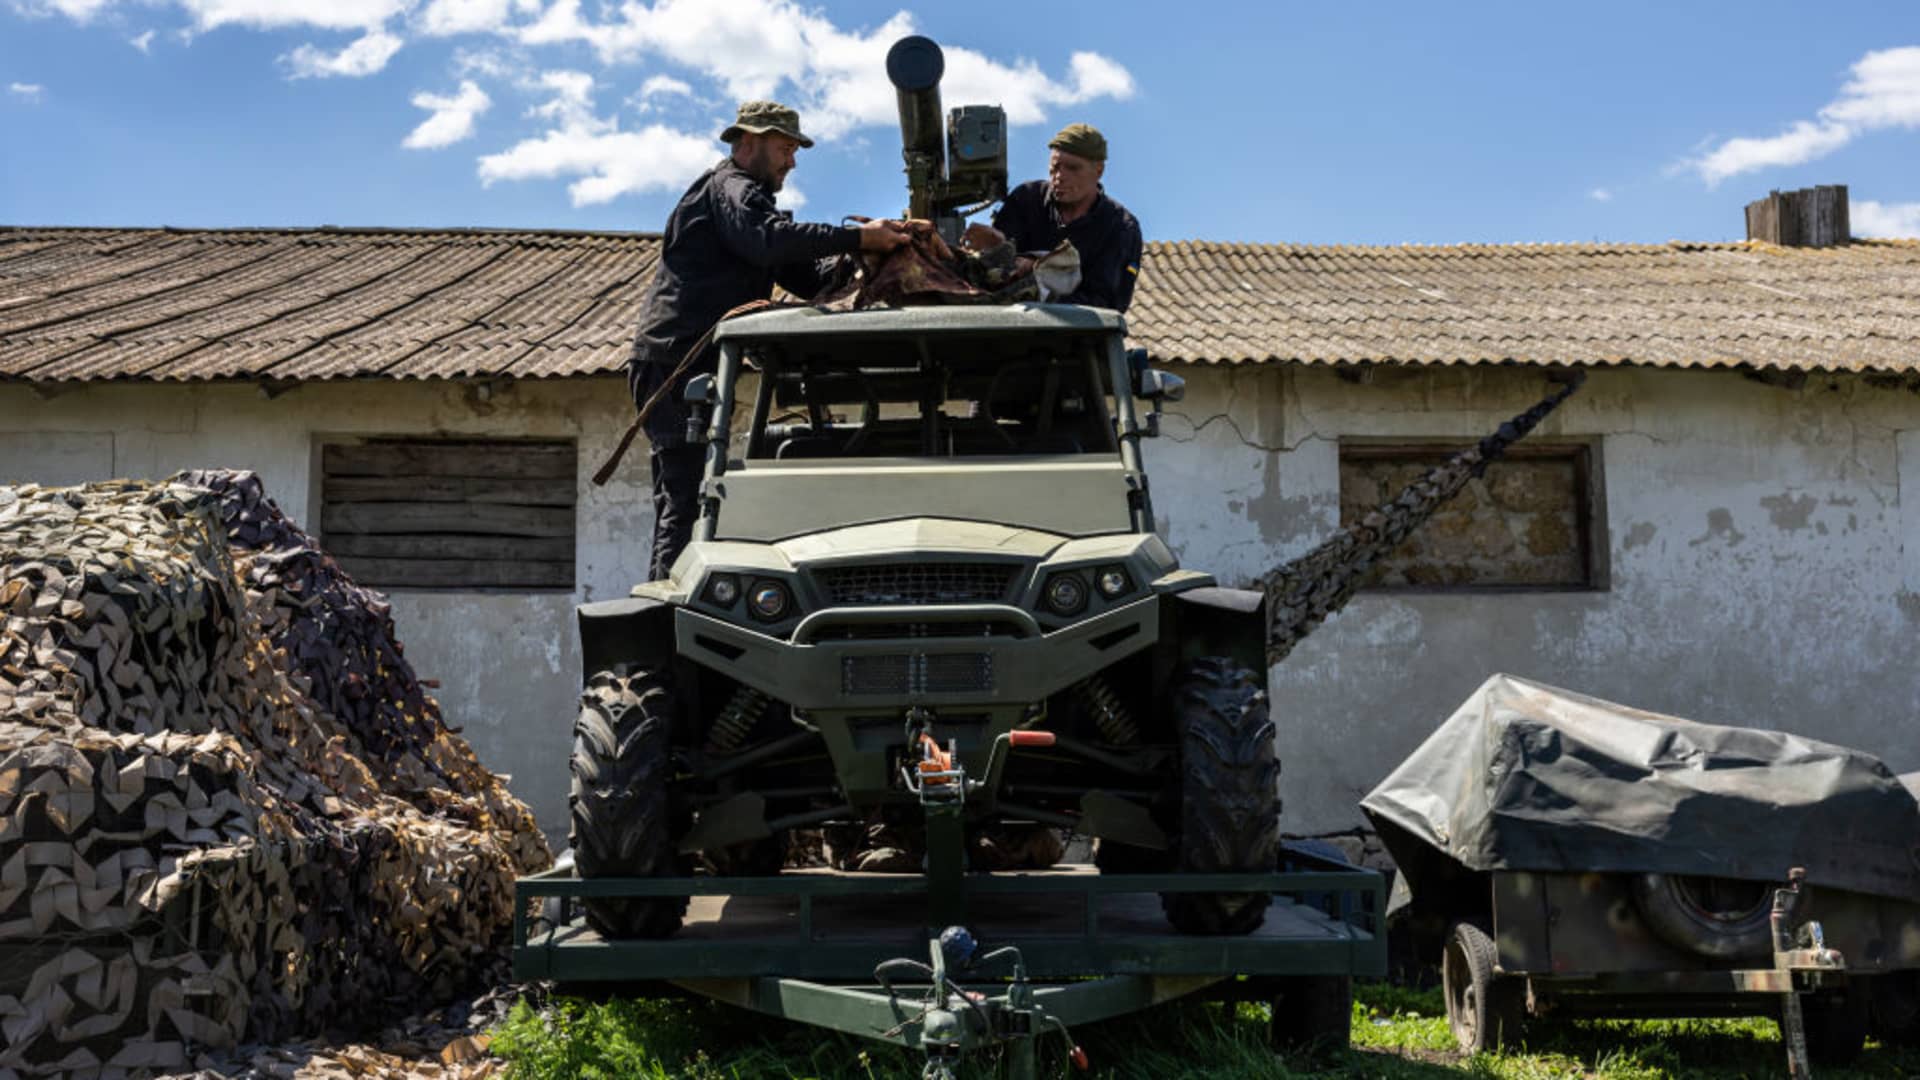 Soldiers put camouflage atop a weaponized Geon Strike 1000 ATV on May 20, 2022 in Kharkiv Oblast, Ukraine. T